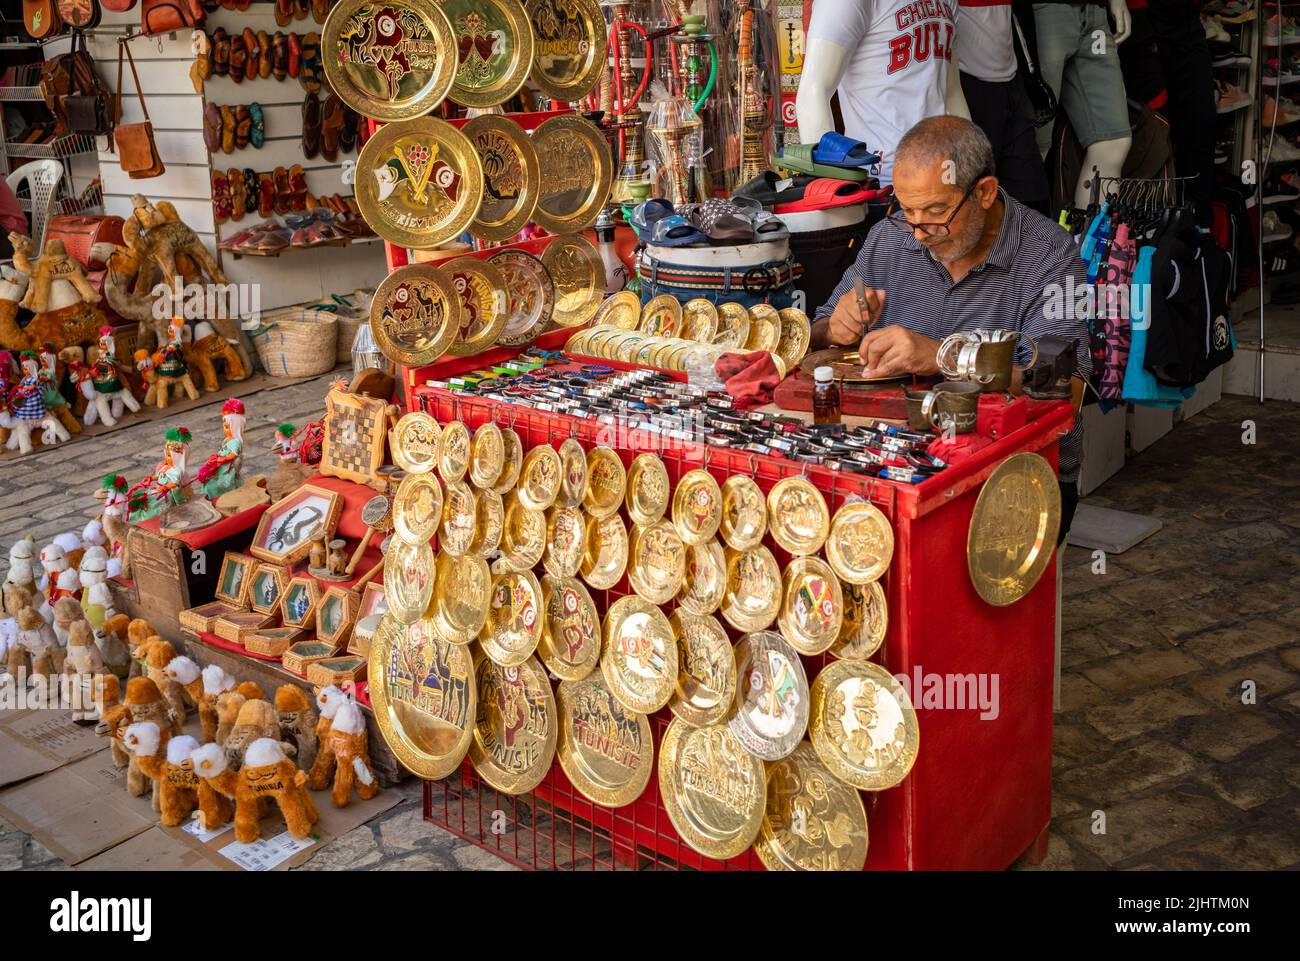 A metal worker makes tourist souvenirs in the souk in the ancient Medina of Sousse, Tunisia. Stock Photo